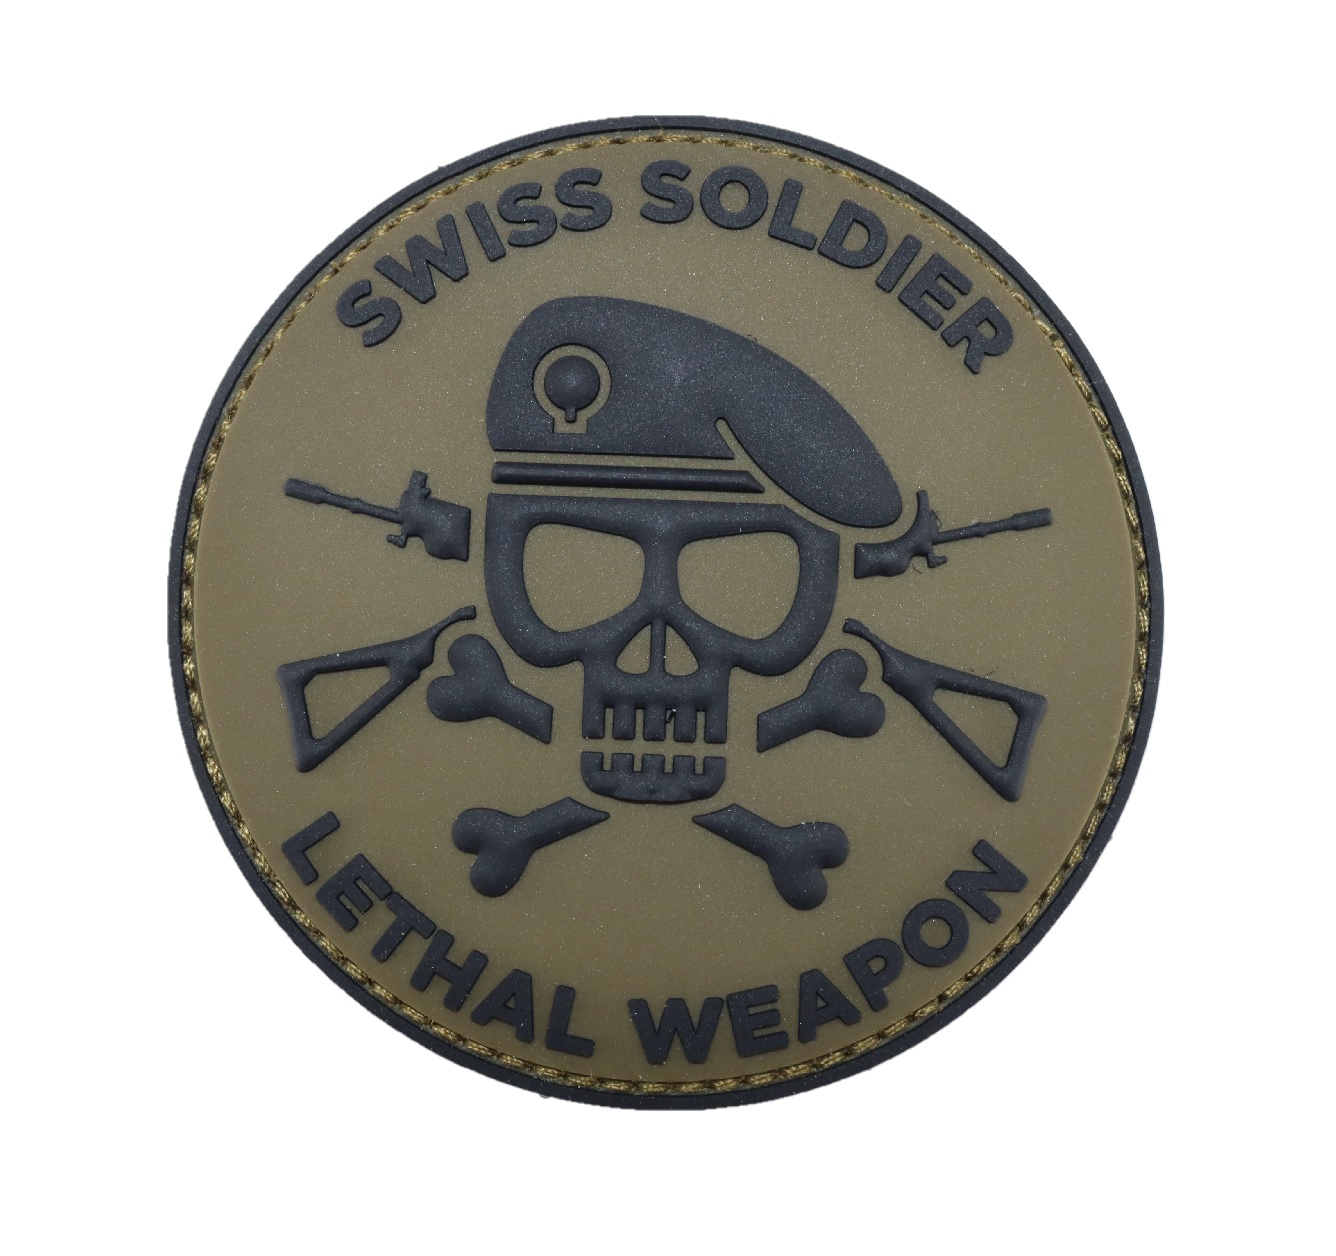 Patch PVC Swiss Soldier Lethal Weapon